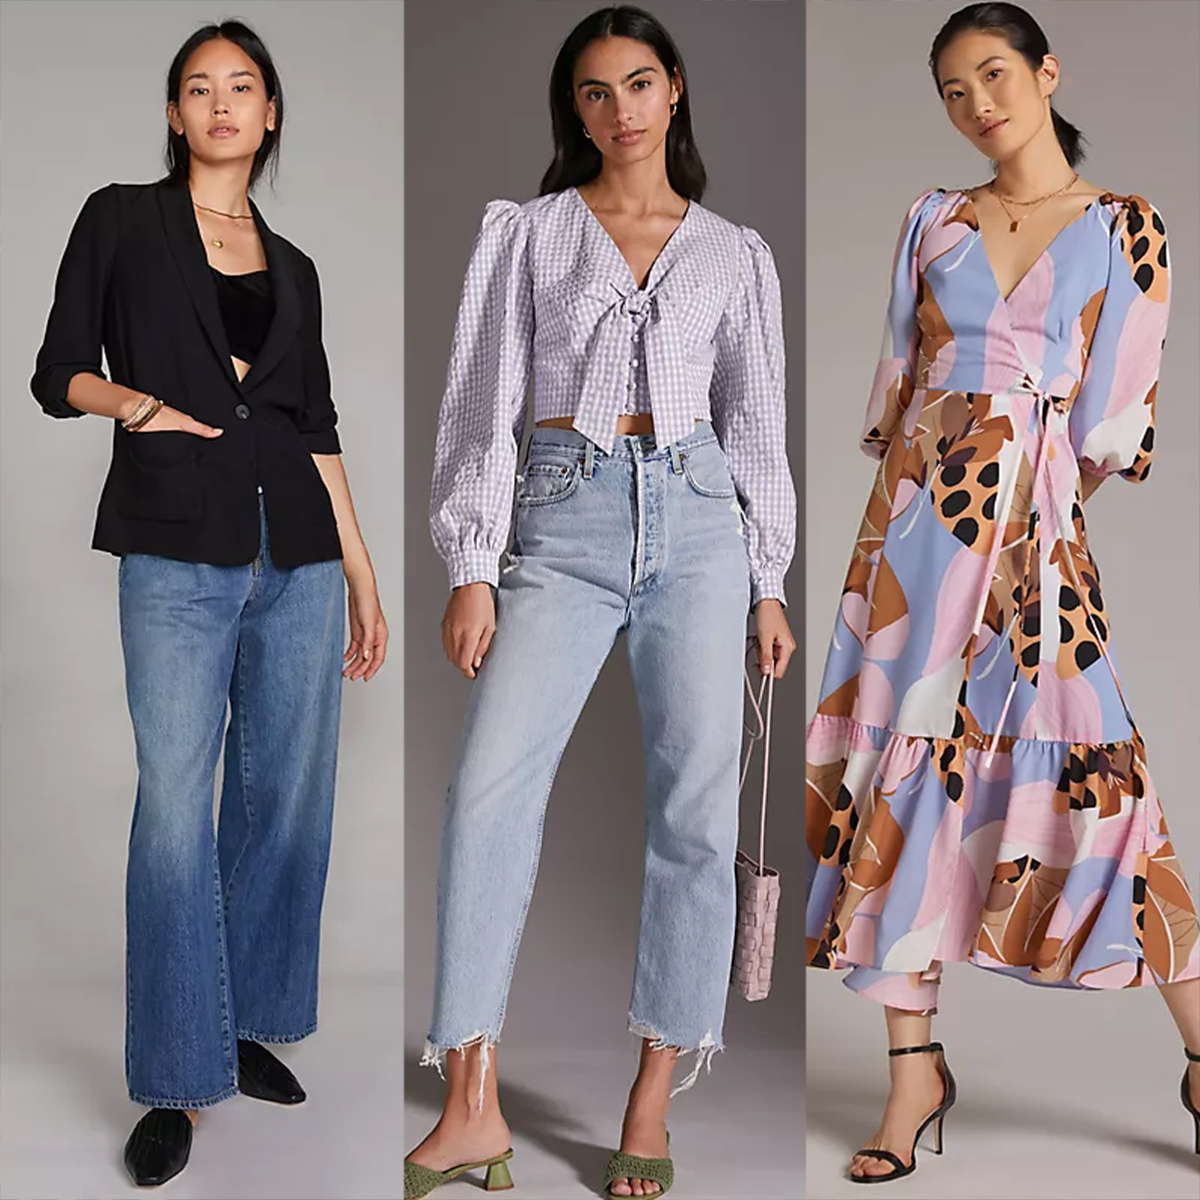 23 Under $35 Fashion Finds You Won't Believe Are From H&M